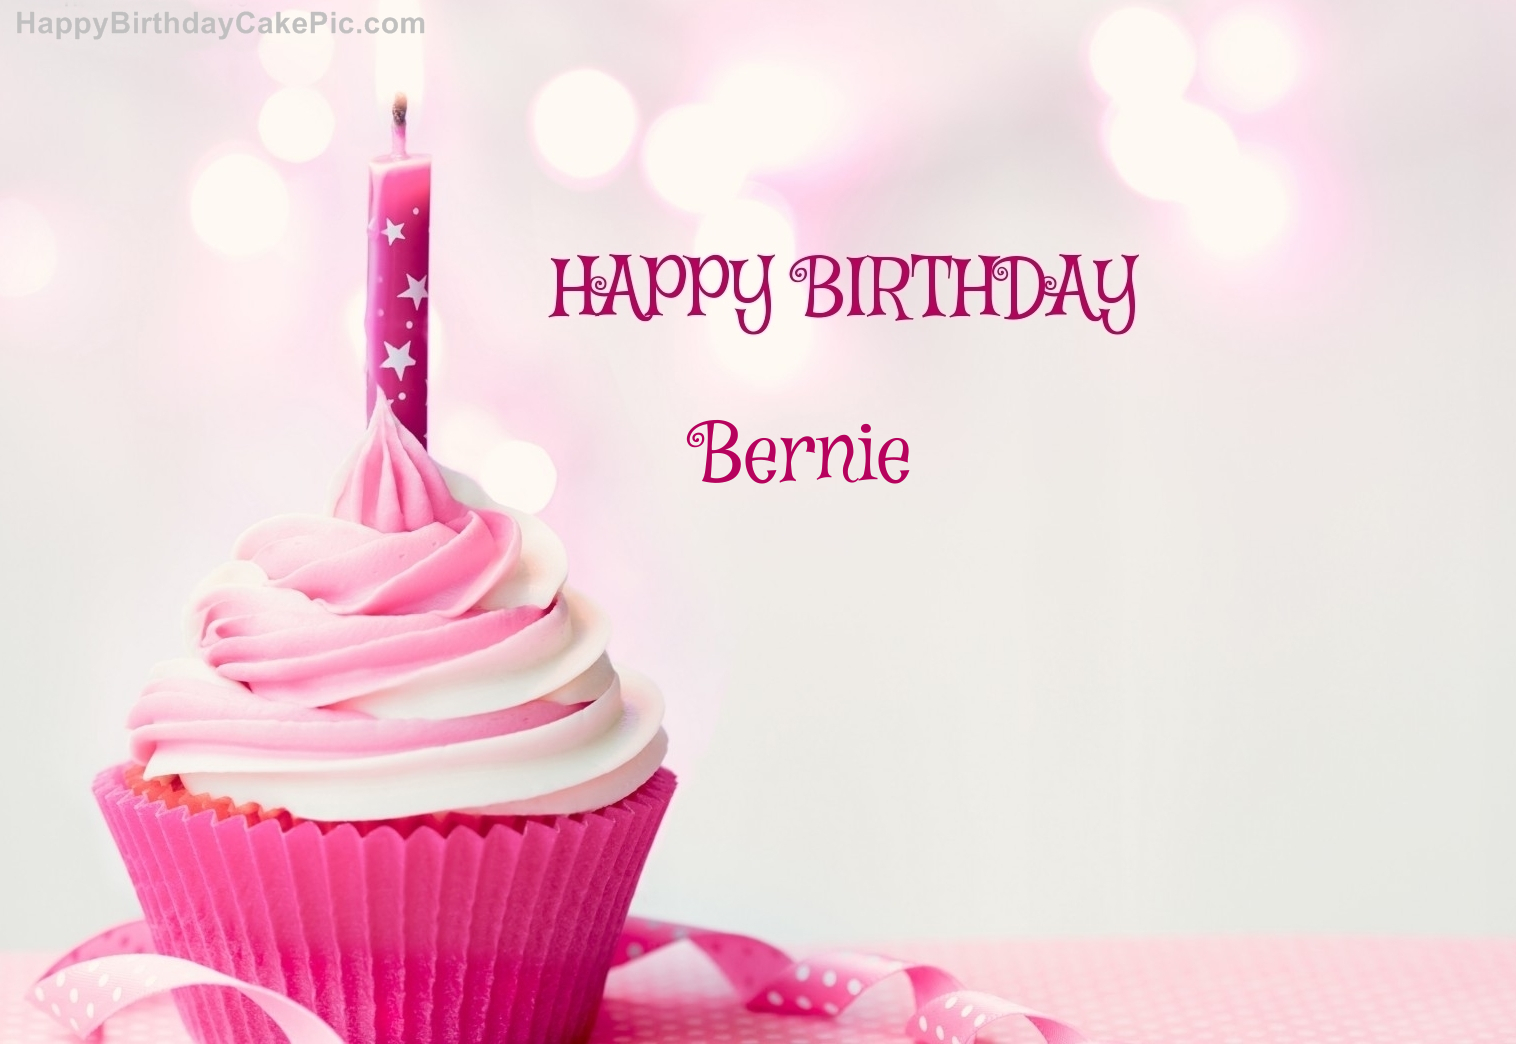 Image result for happy birthday cupcake bernie pic